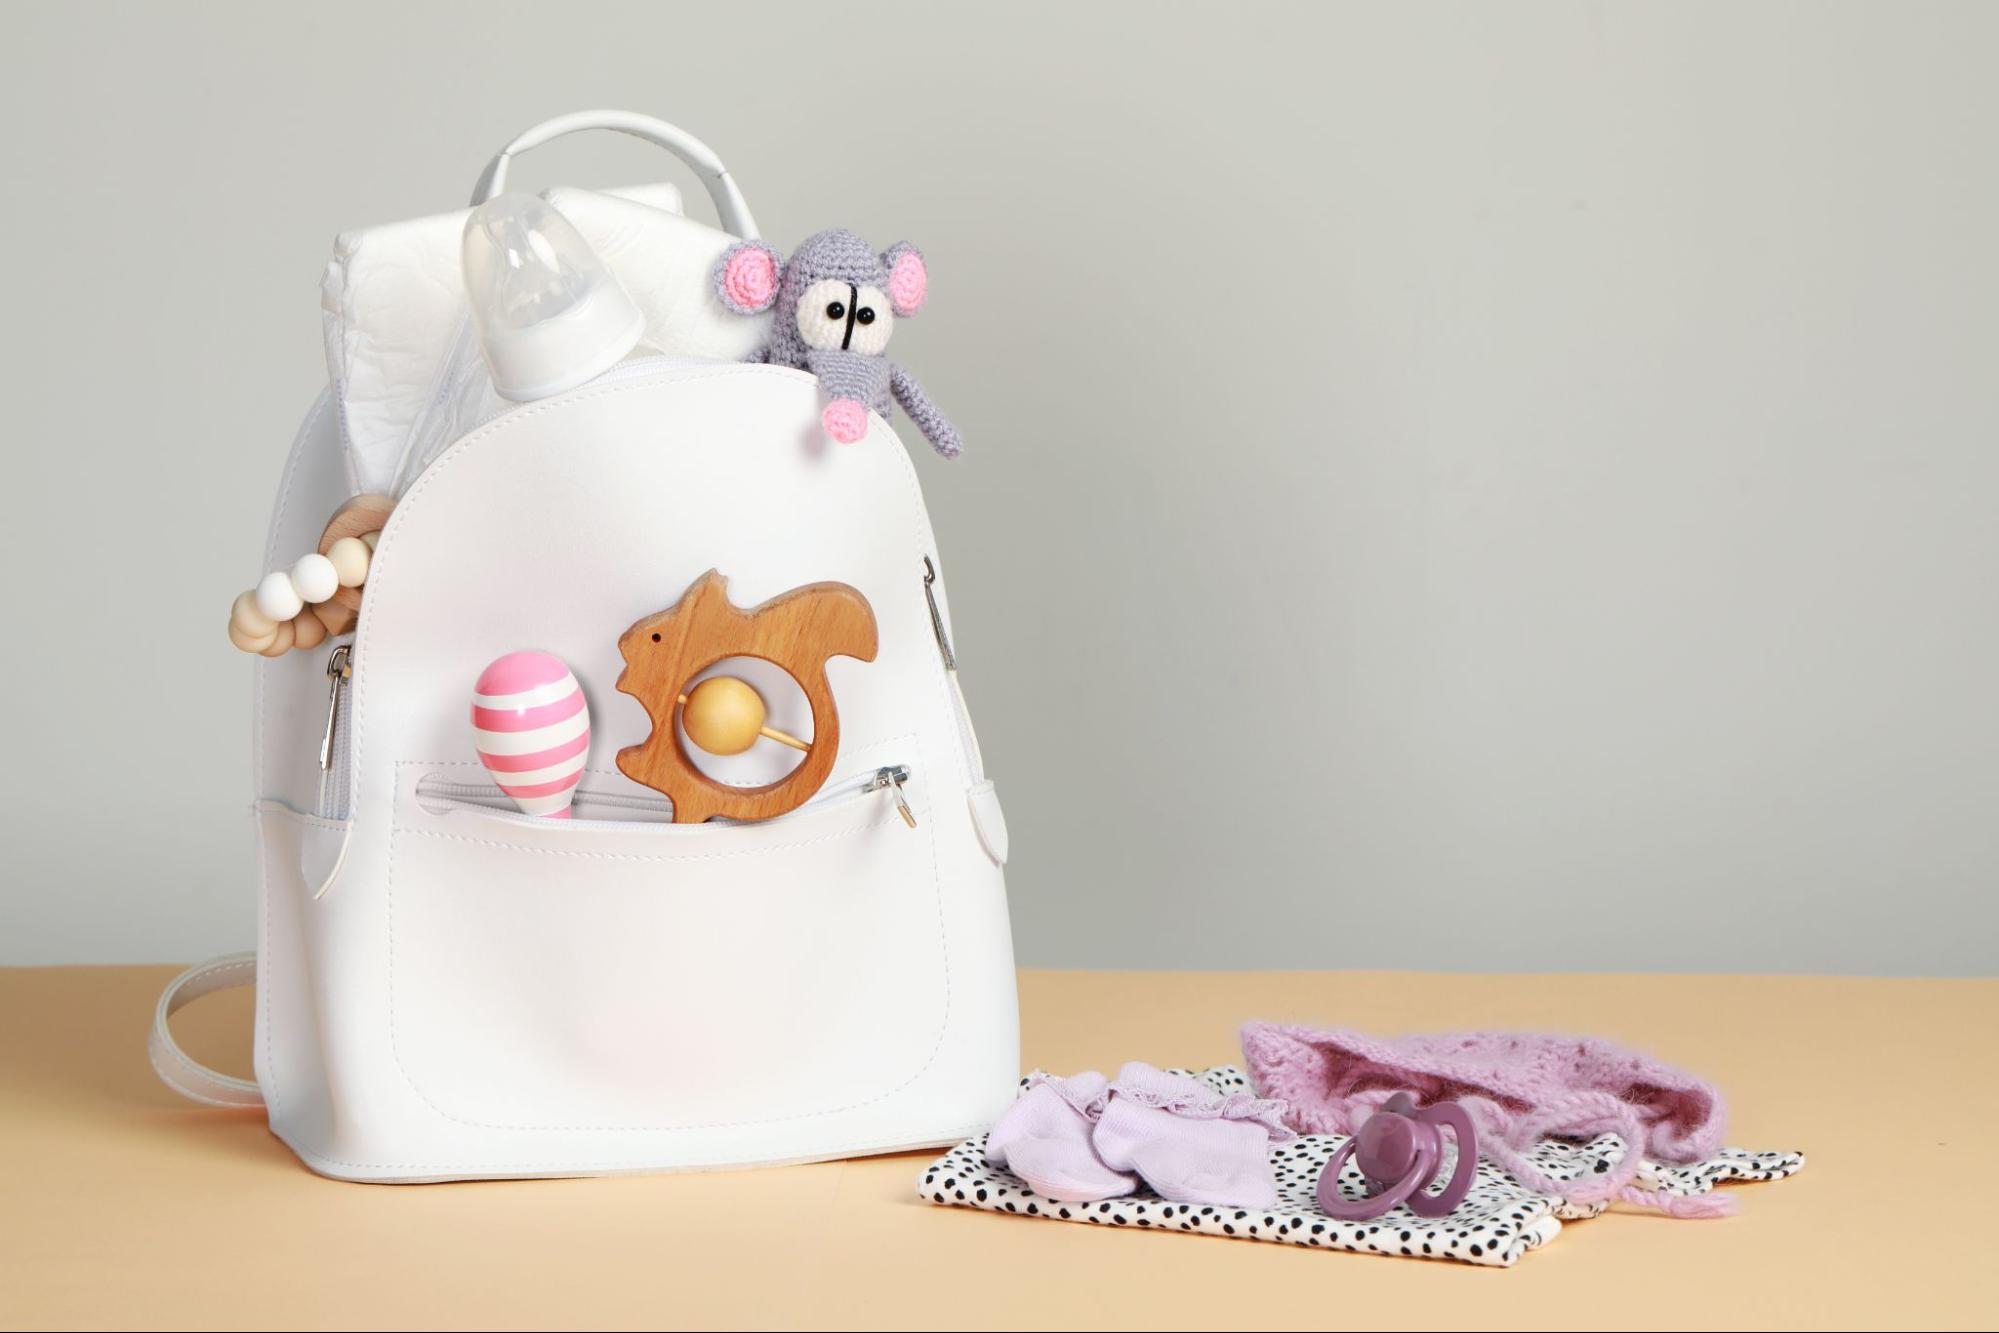 Trendy and customized diaper bags for stylish baby shower gifts